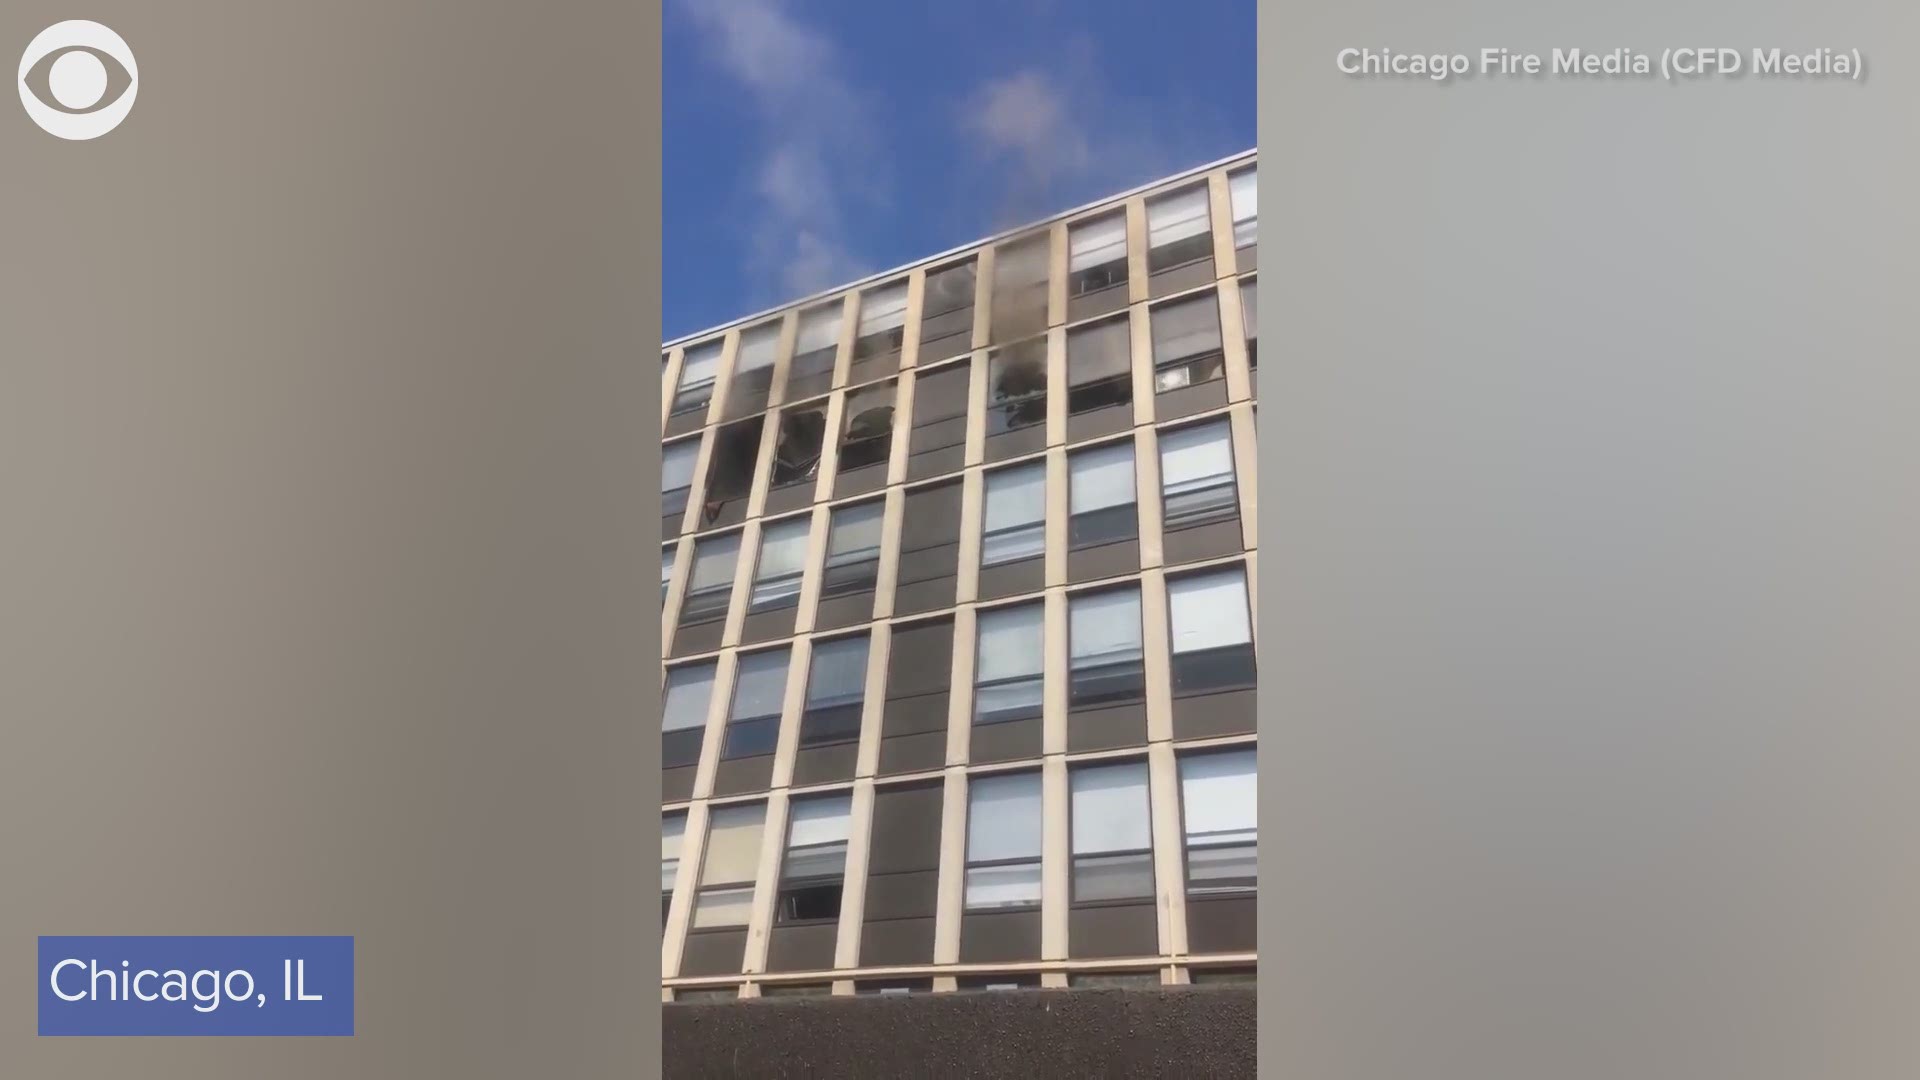 Here’s the moment a cat jumped from a fifth-floor window of a burning building in Chicago on Thursday (5/13). The fire department tweeted the cat ran away